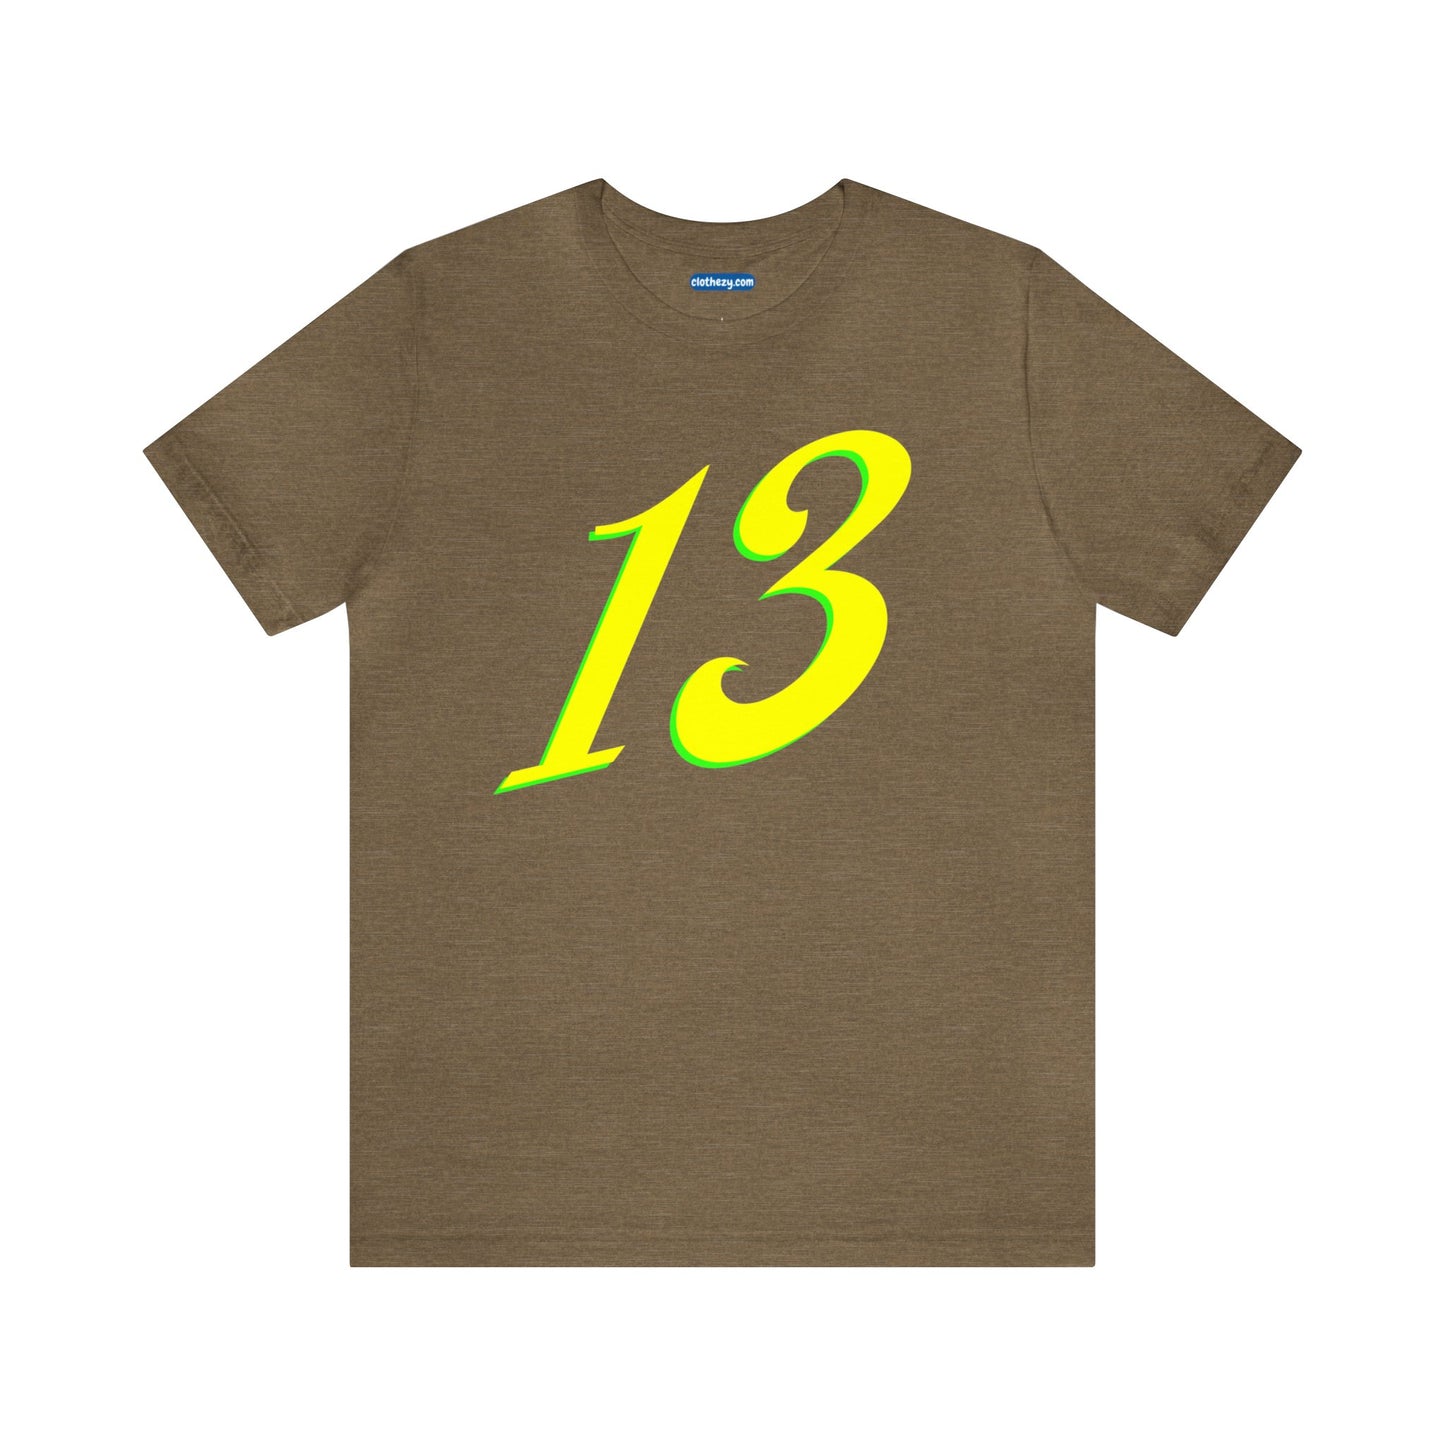 Number 13 Design - Soft Cotton Tee for birthdays and celebrations, Gift for friends and family, Multiple Options by clothezy.com in Olive Heather Size Small - Buy Now